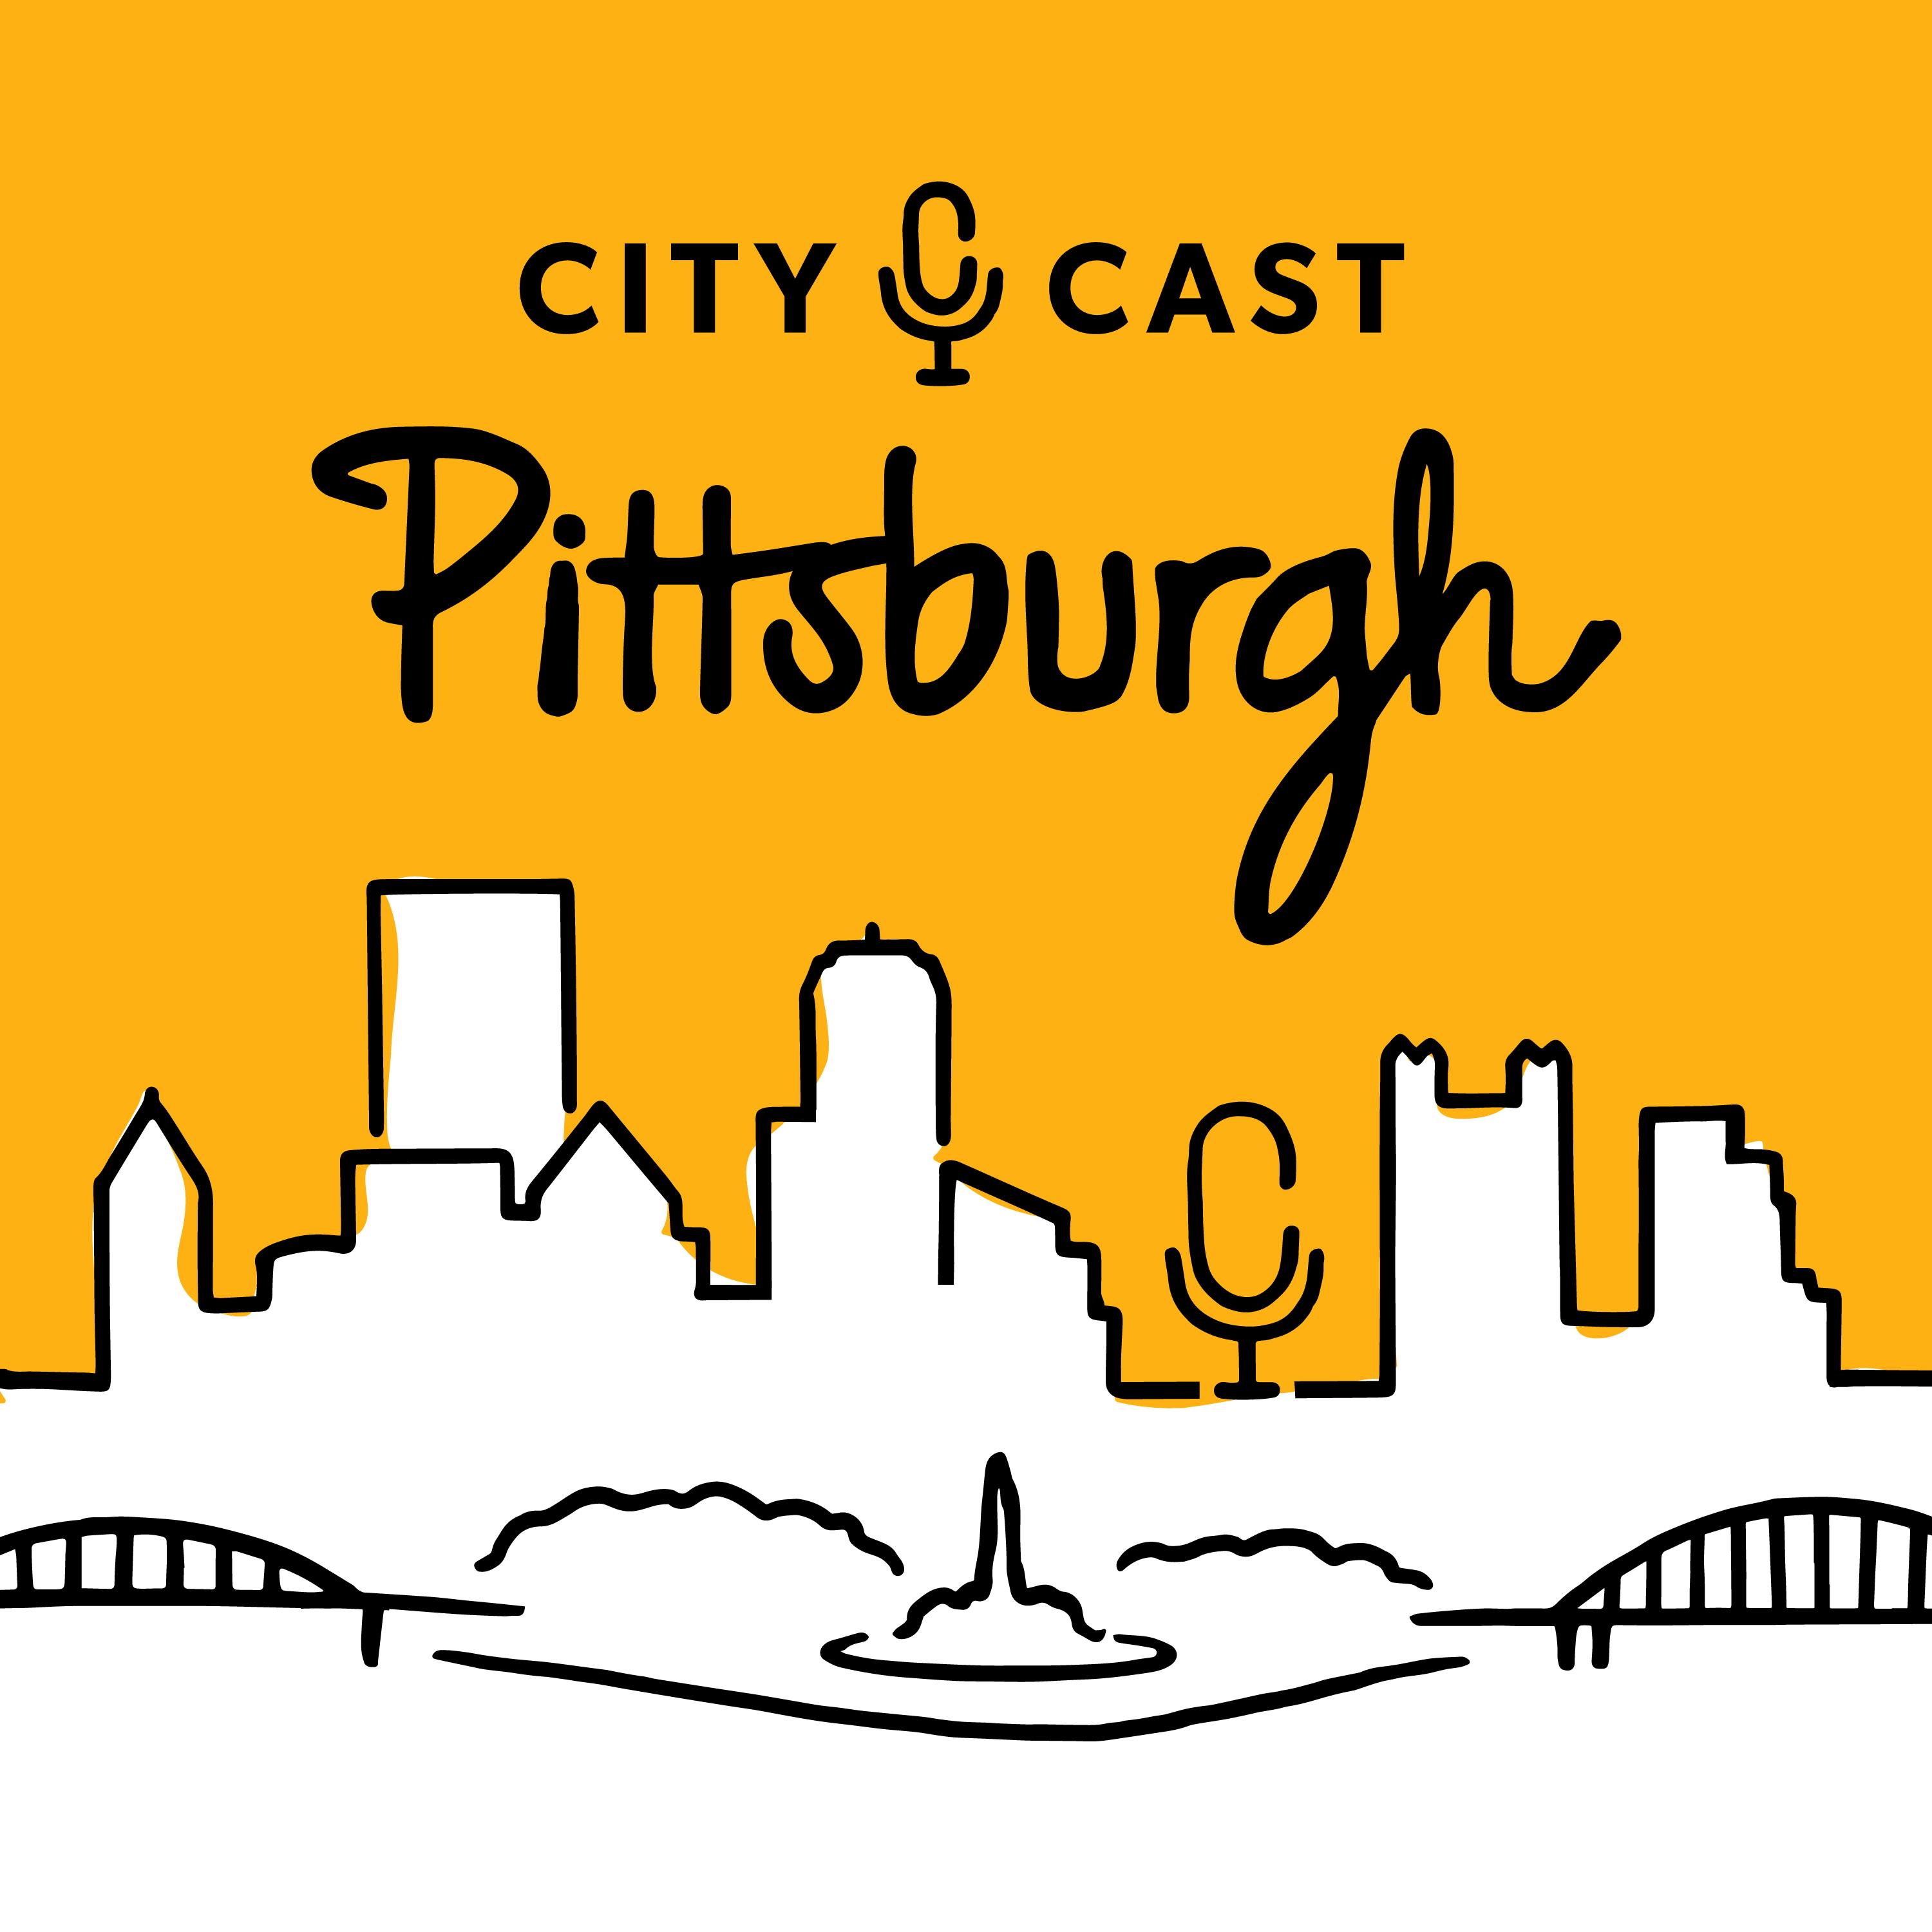 Community Kitchen Cooks Up Job Opportunities for Pgh Residents